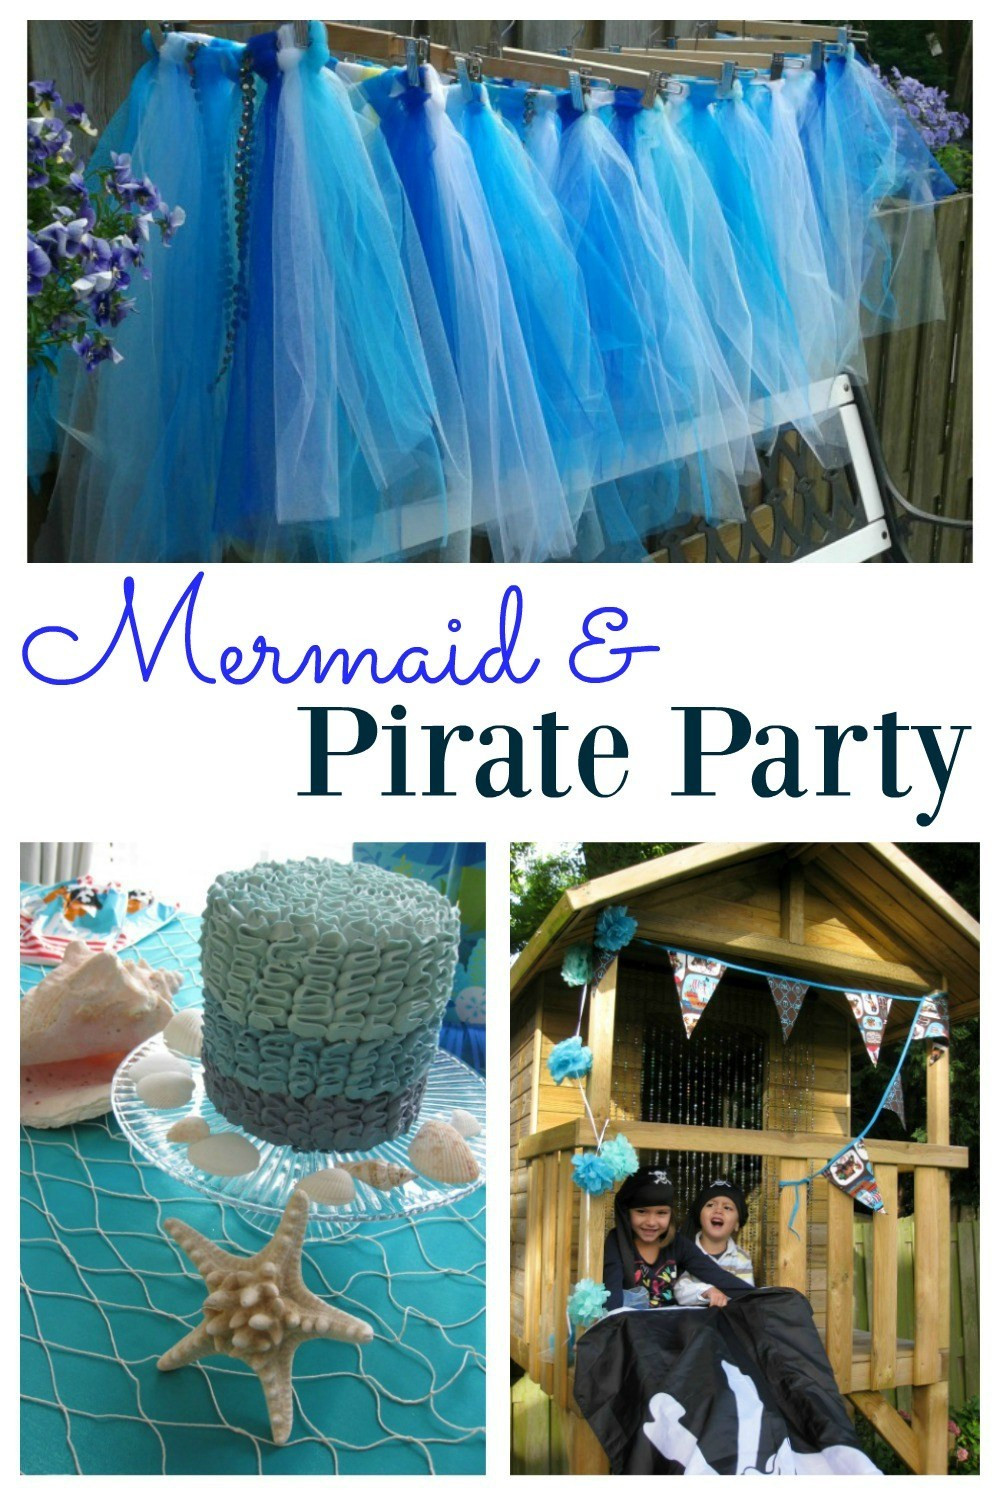 Mermaid Pirate Party Ideas
 Mermaid and Pirate Party